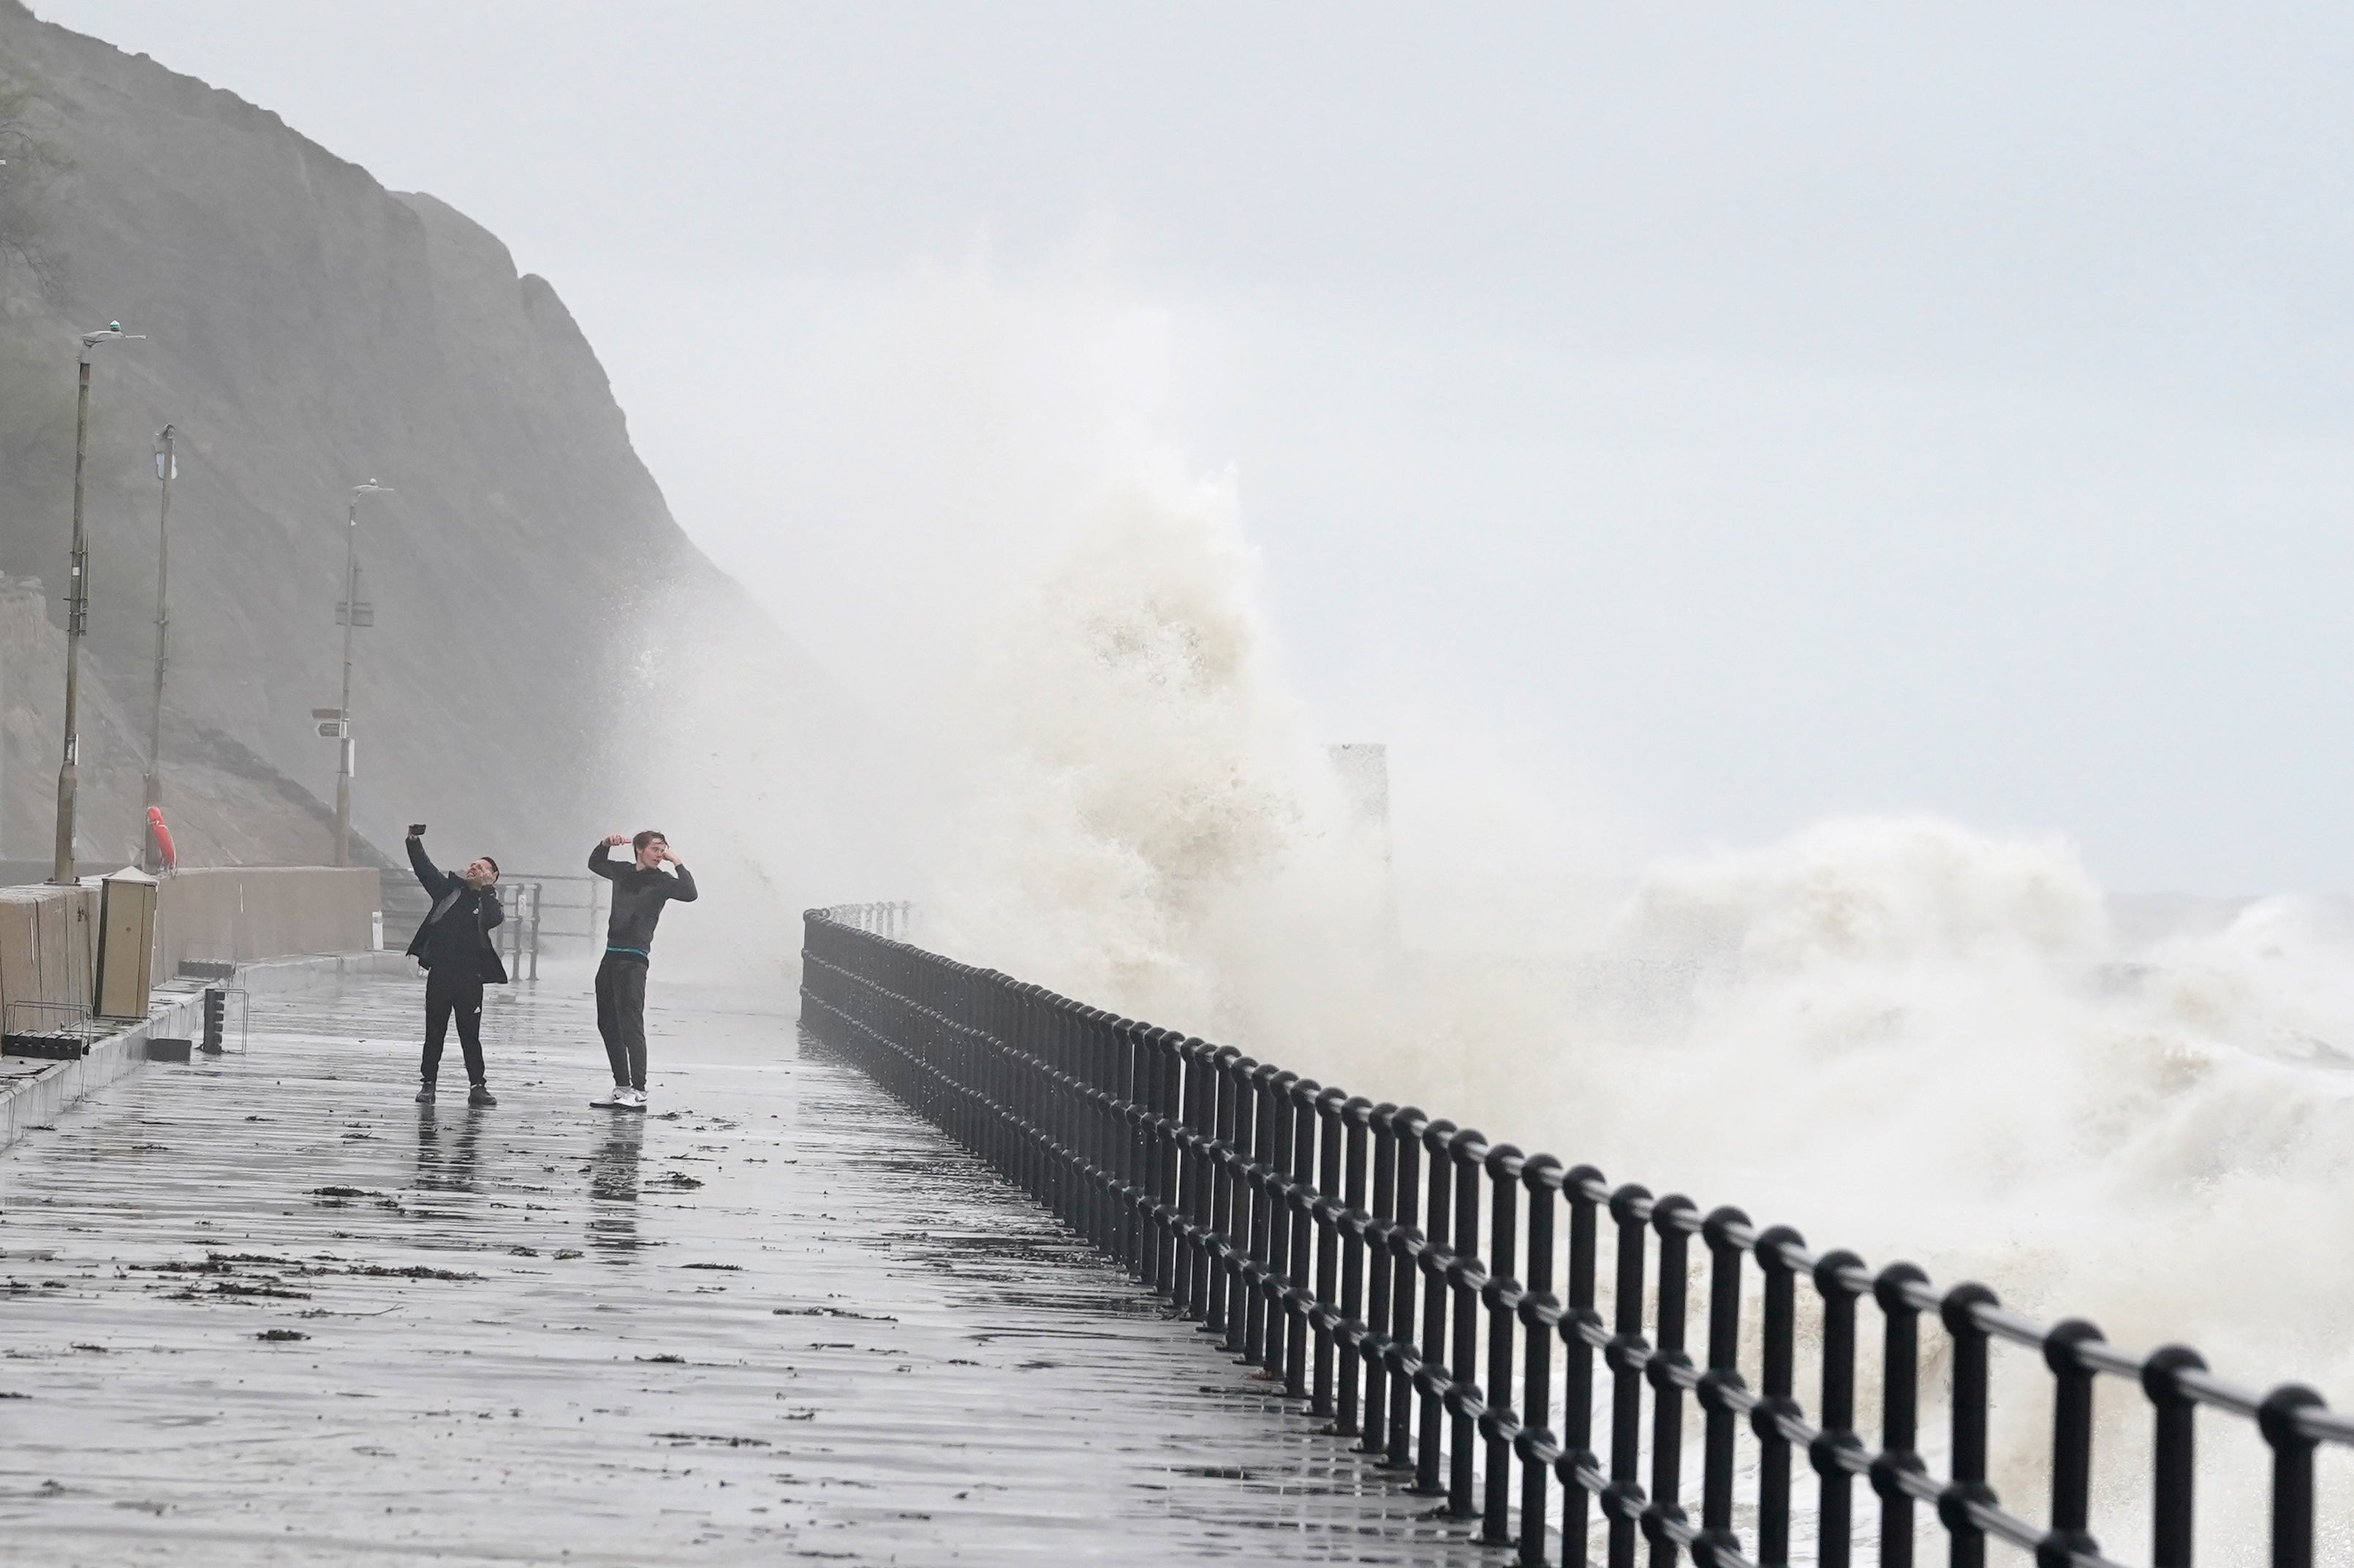 People photograph the waves crashing over the promenade in Folkestone, Kent